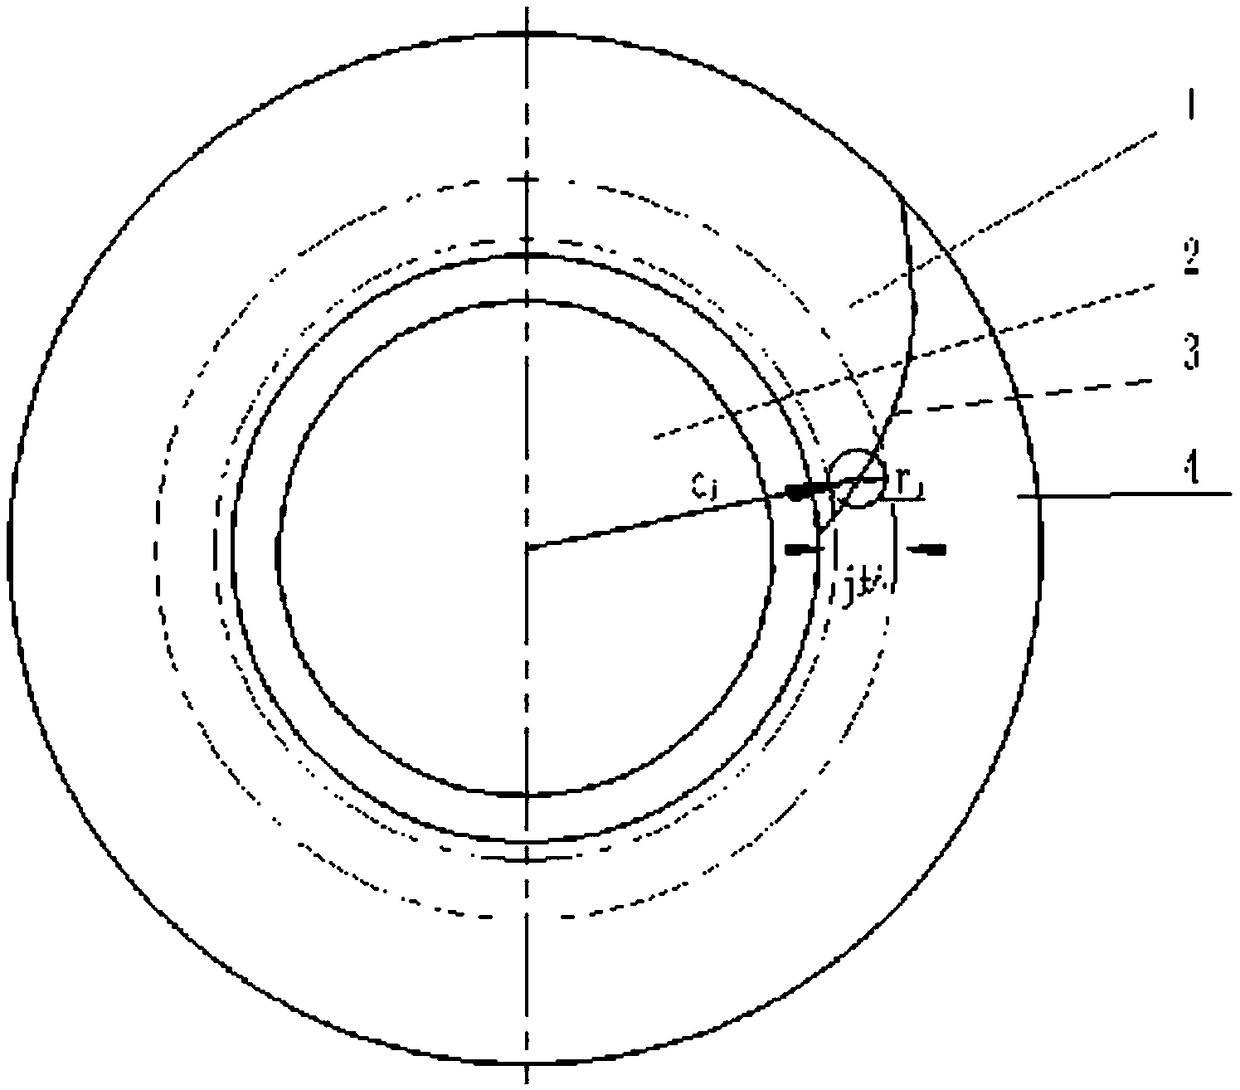 A method for open an involute of a brake disc of an air duct of a high-performance sports car